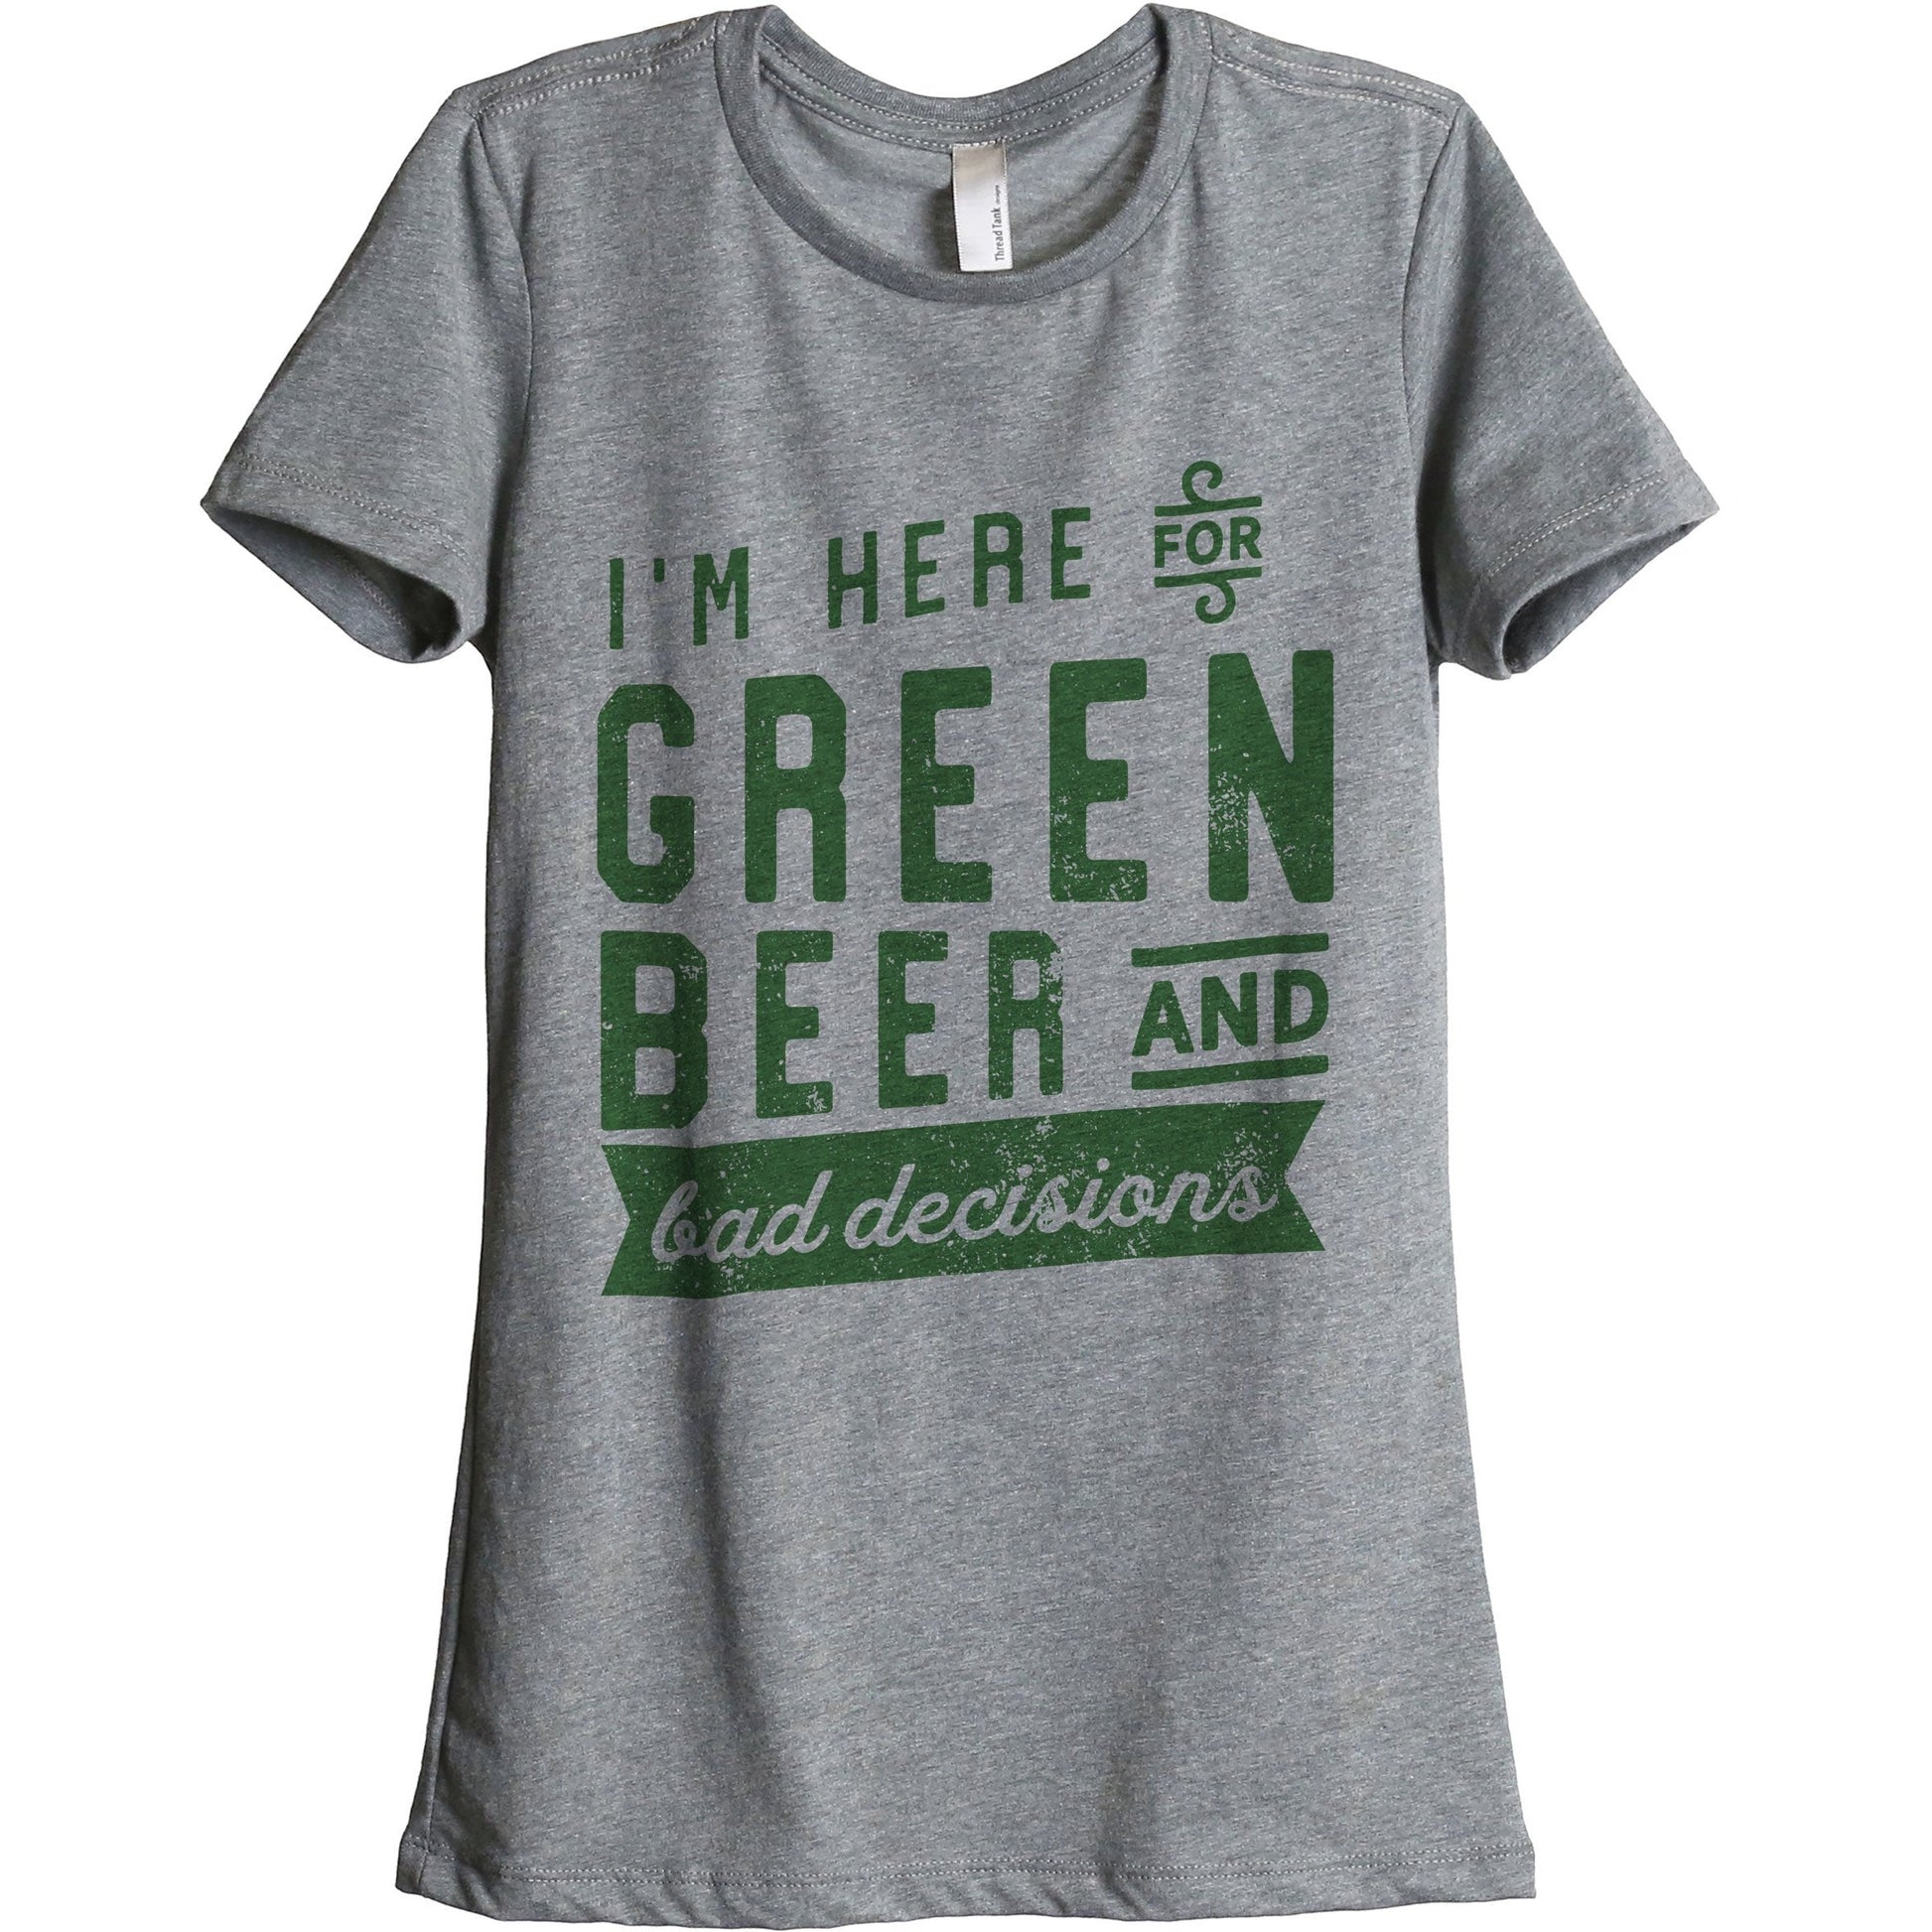 I'm Here For Green Beer And Bad Decisions Women's Relaxed Crewneck Graphic T-Shirt Top Tee Exclusive Shamrock Green